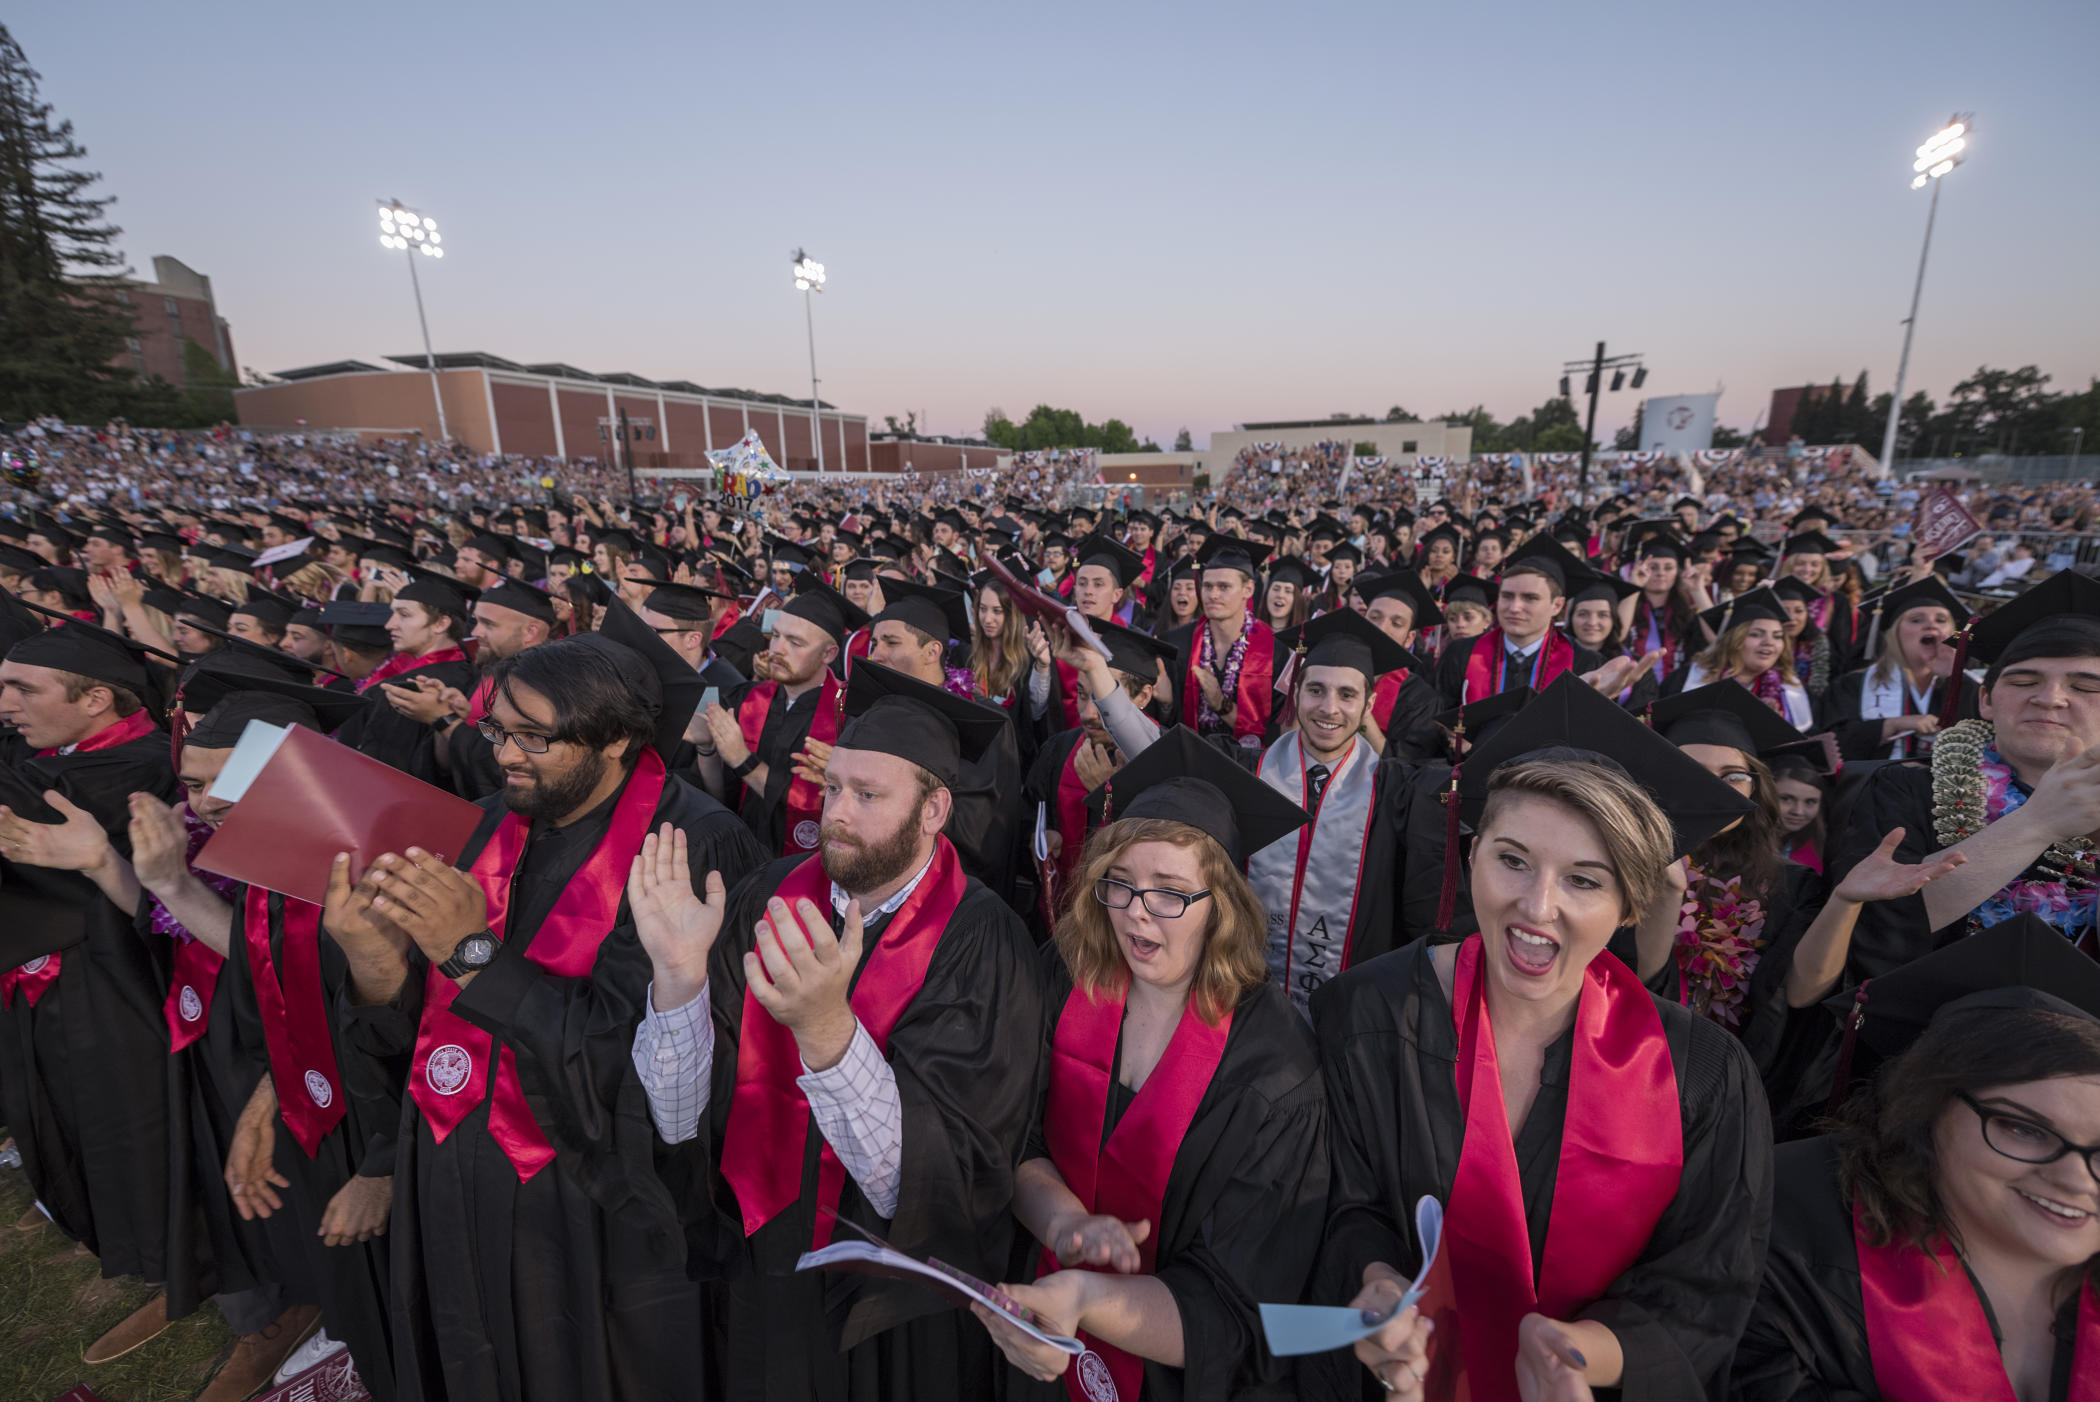 Chico State will host its 128th Commencement Ceremonies this week. Graduate ceremonies will take place Thursday, while undergraduate ceremonies take place Friday, Saturday and Sunday, with special ceremonies happening Tuesday through Sunday.